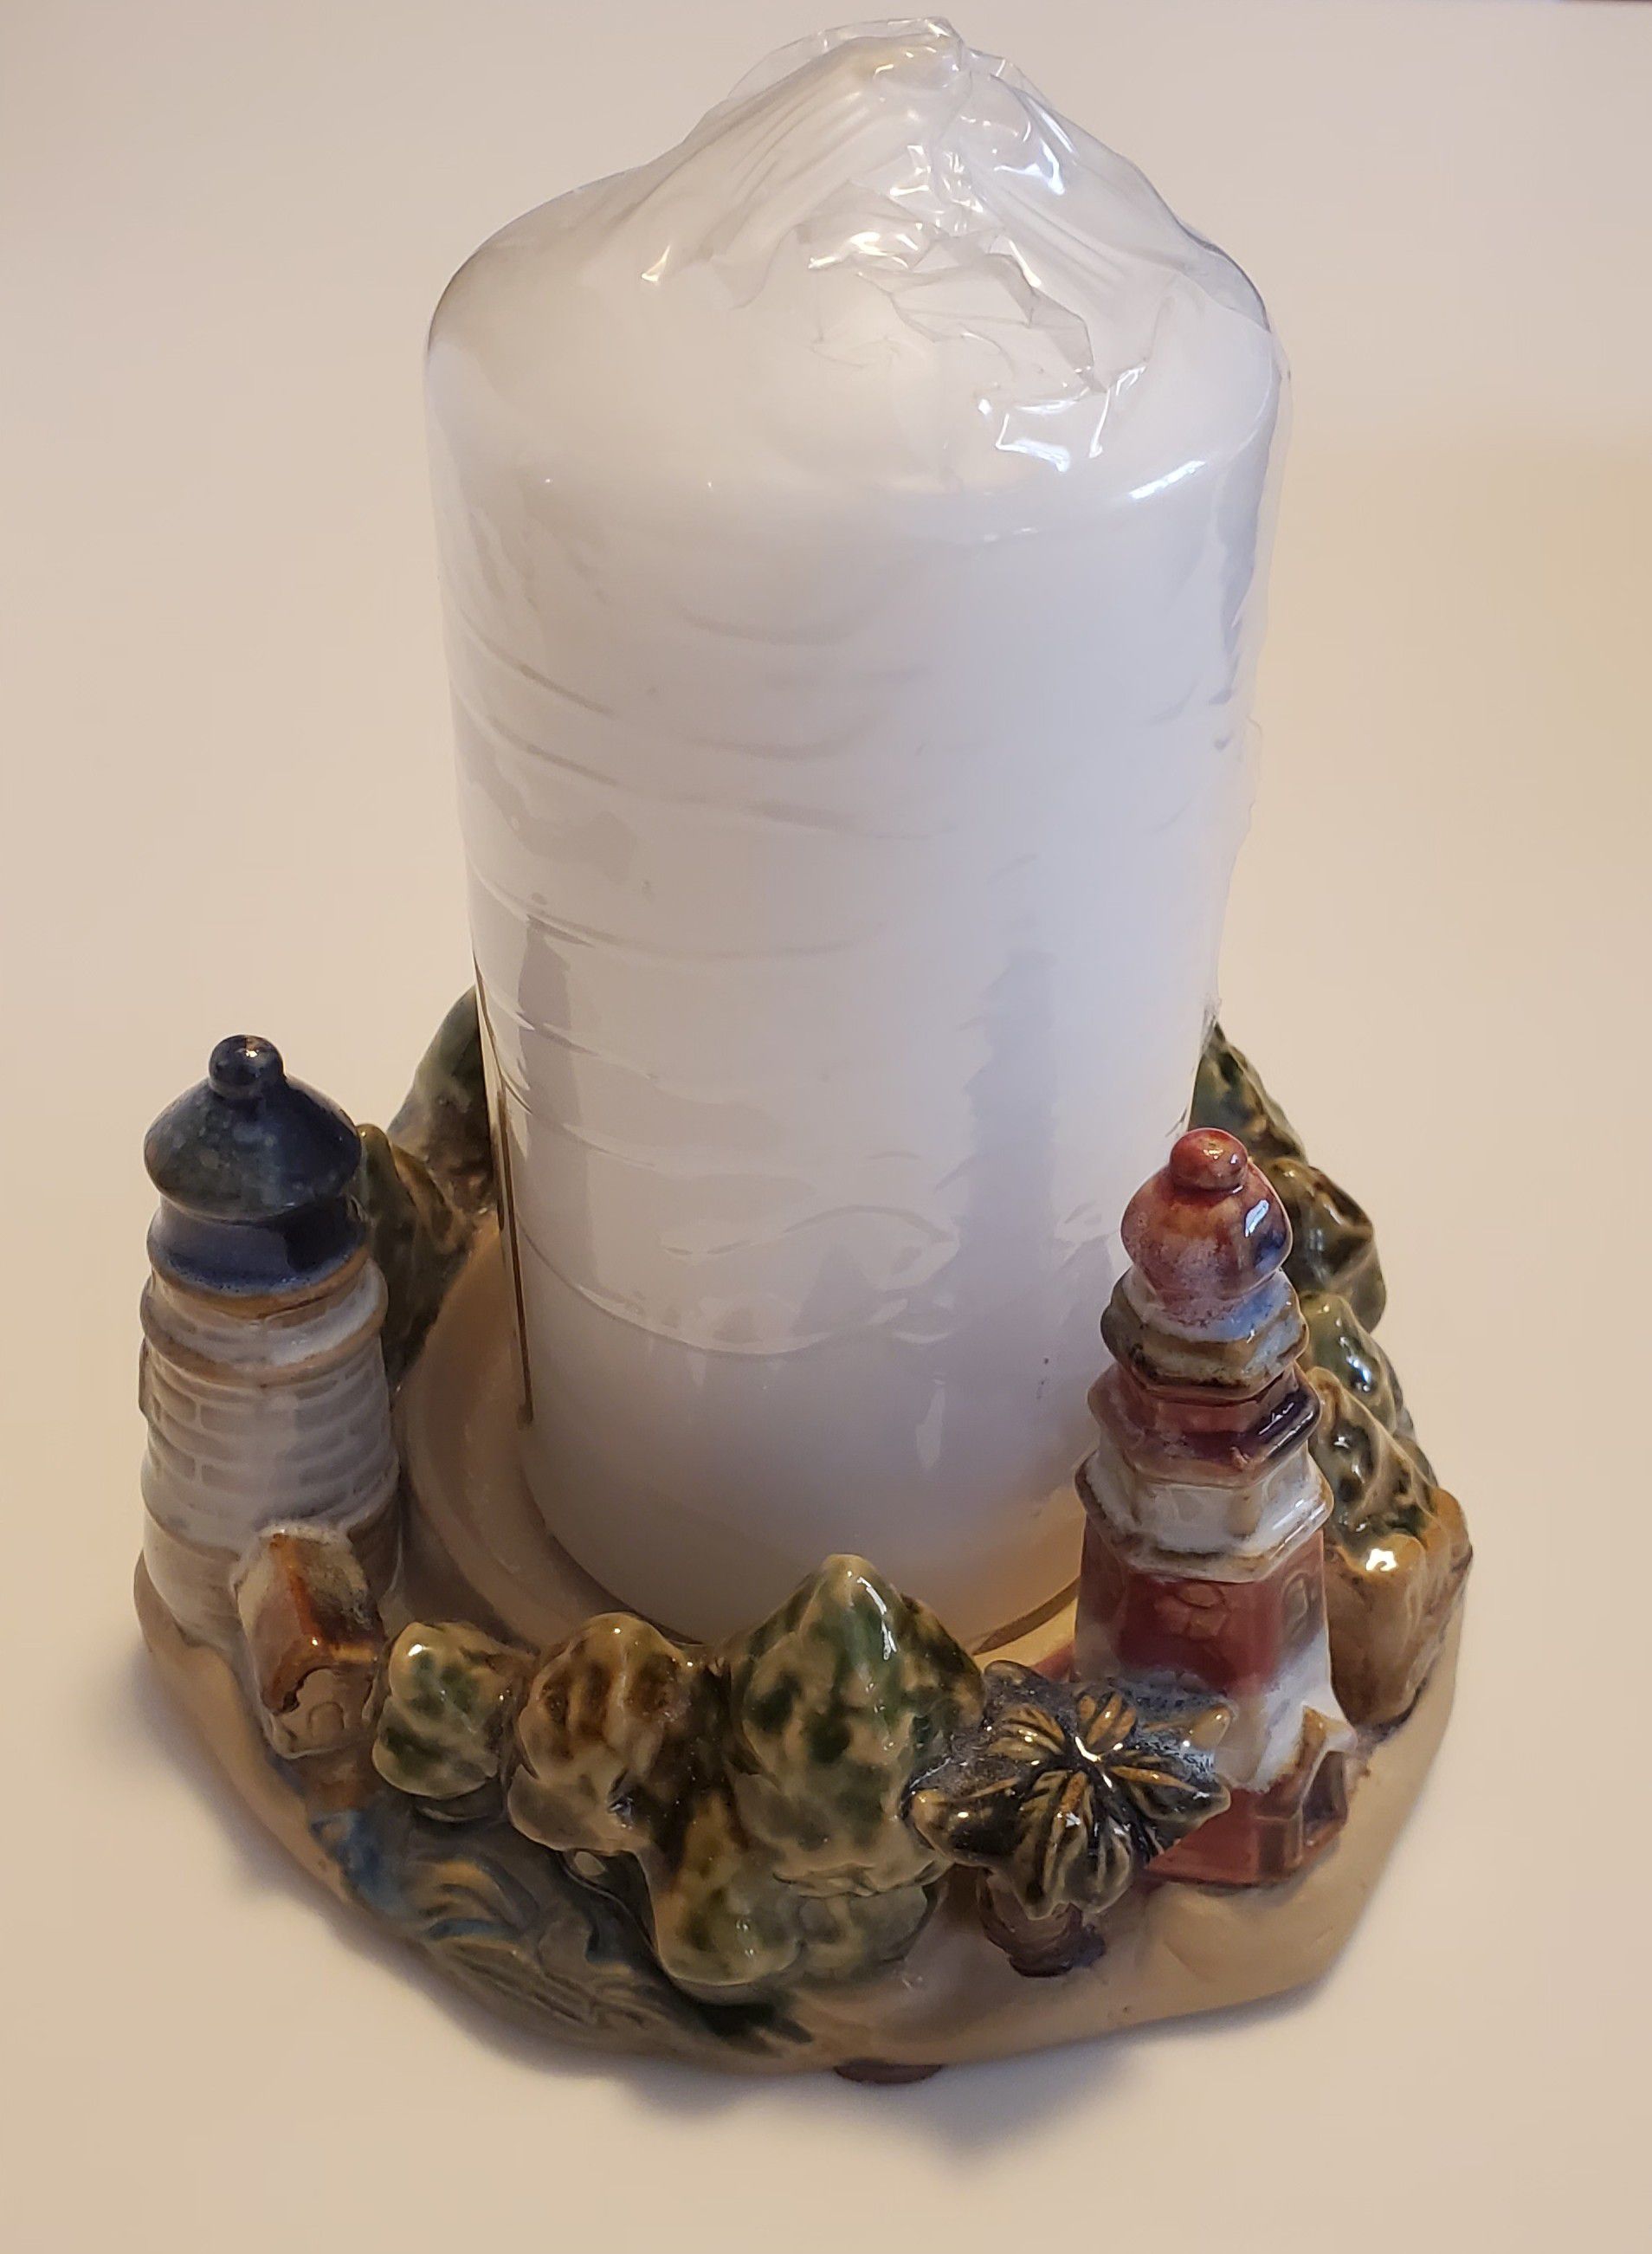 LIGHT HOUSE CANDLE HOLDER WITH NEW CANDLE